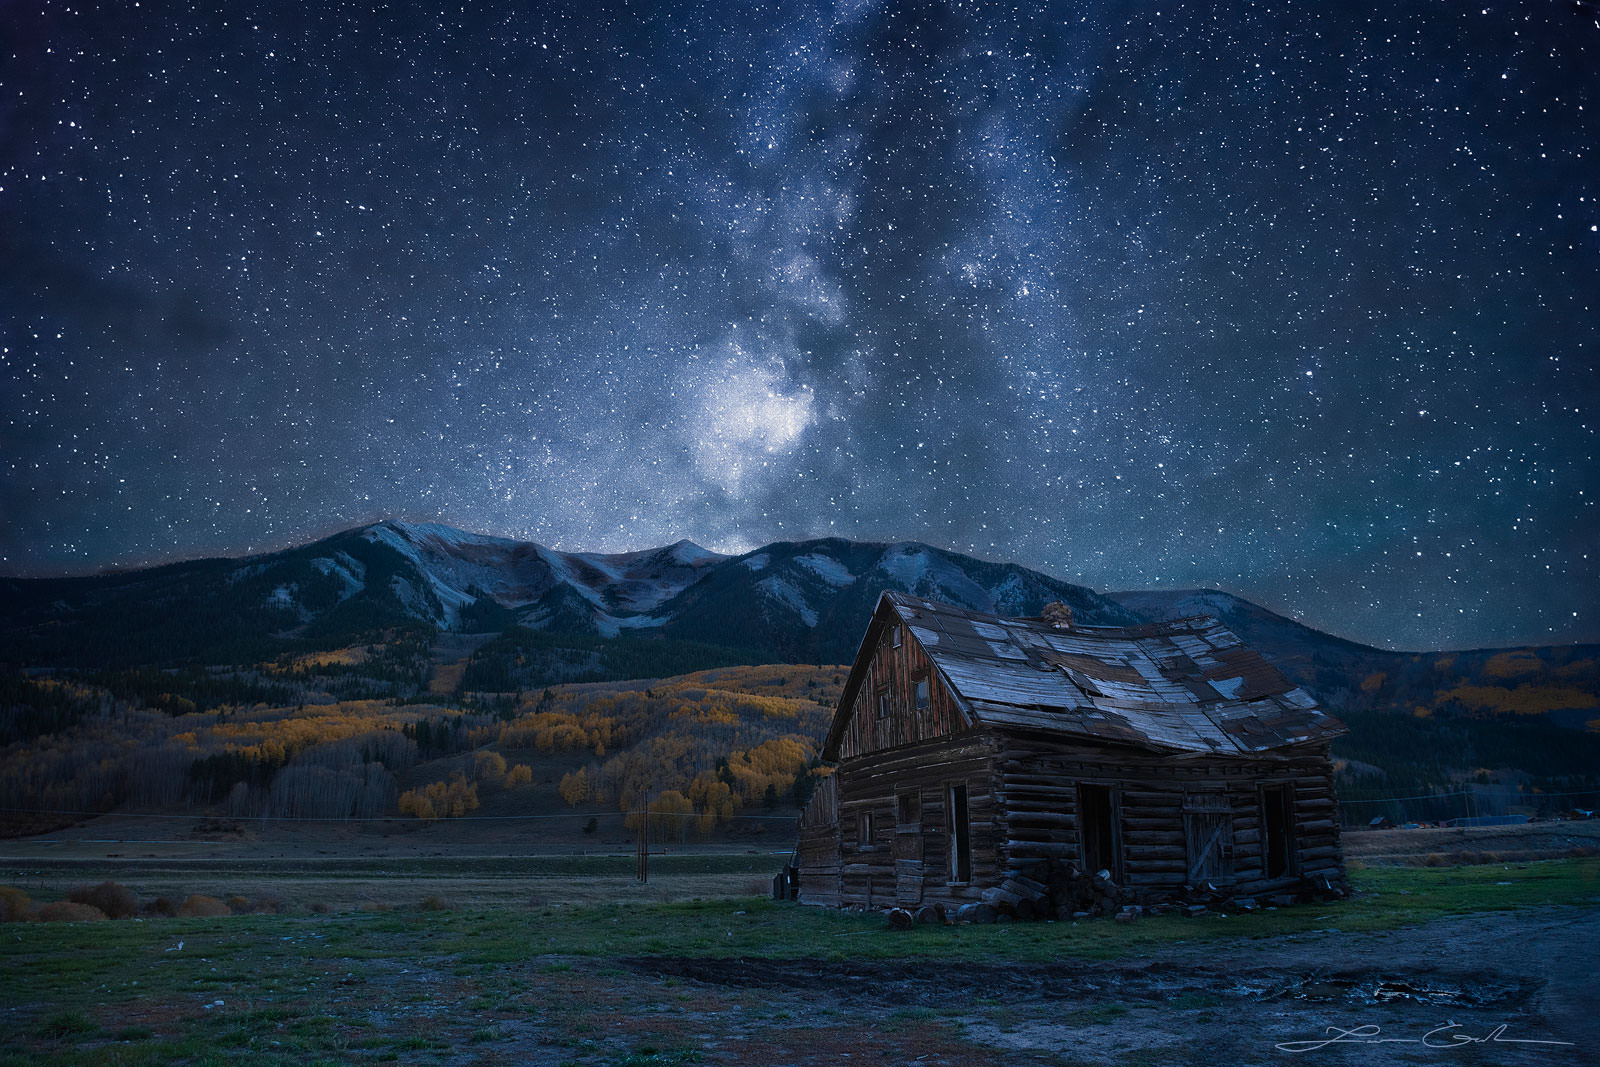 Nigh shot of an old barn, yellow aspen trees and mountains under a starry sky with the milky way